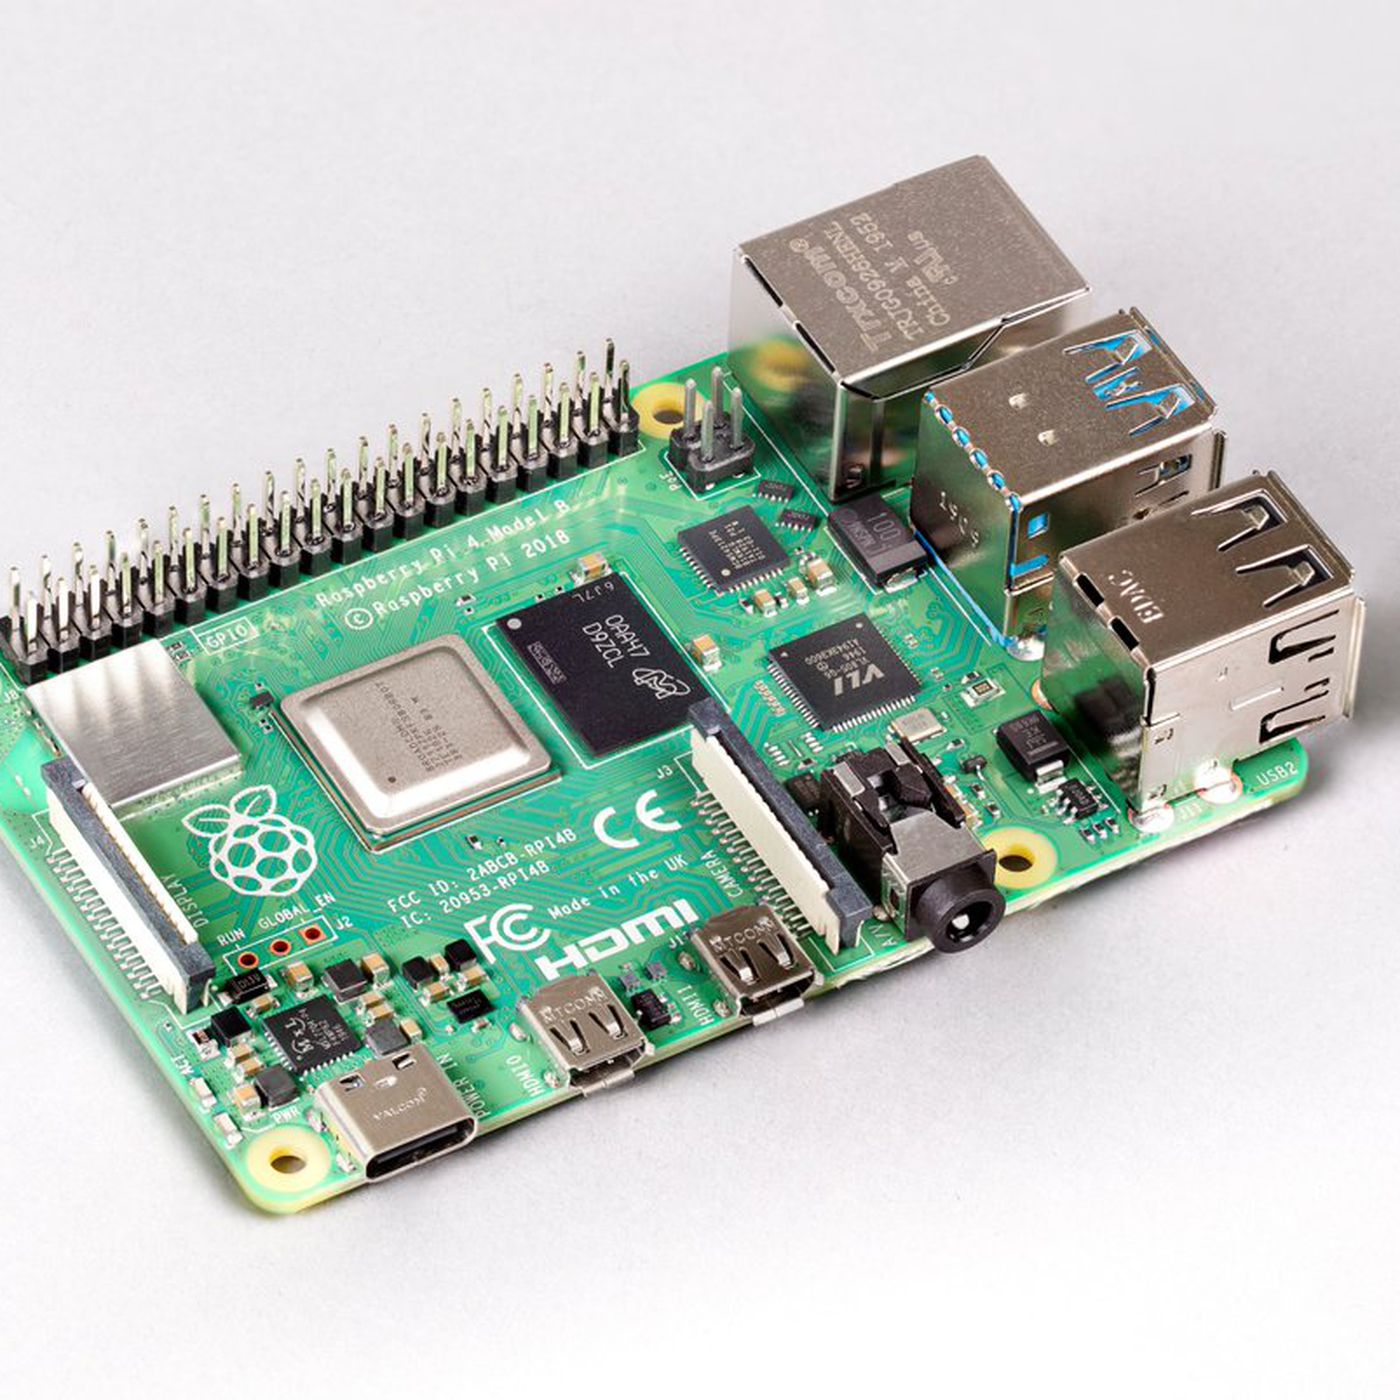 The most powerful Raspberry Pi now has 8GB of RAM - The Verge